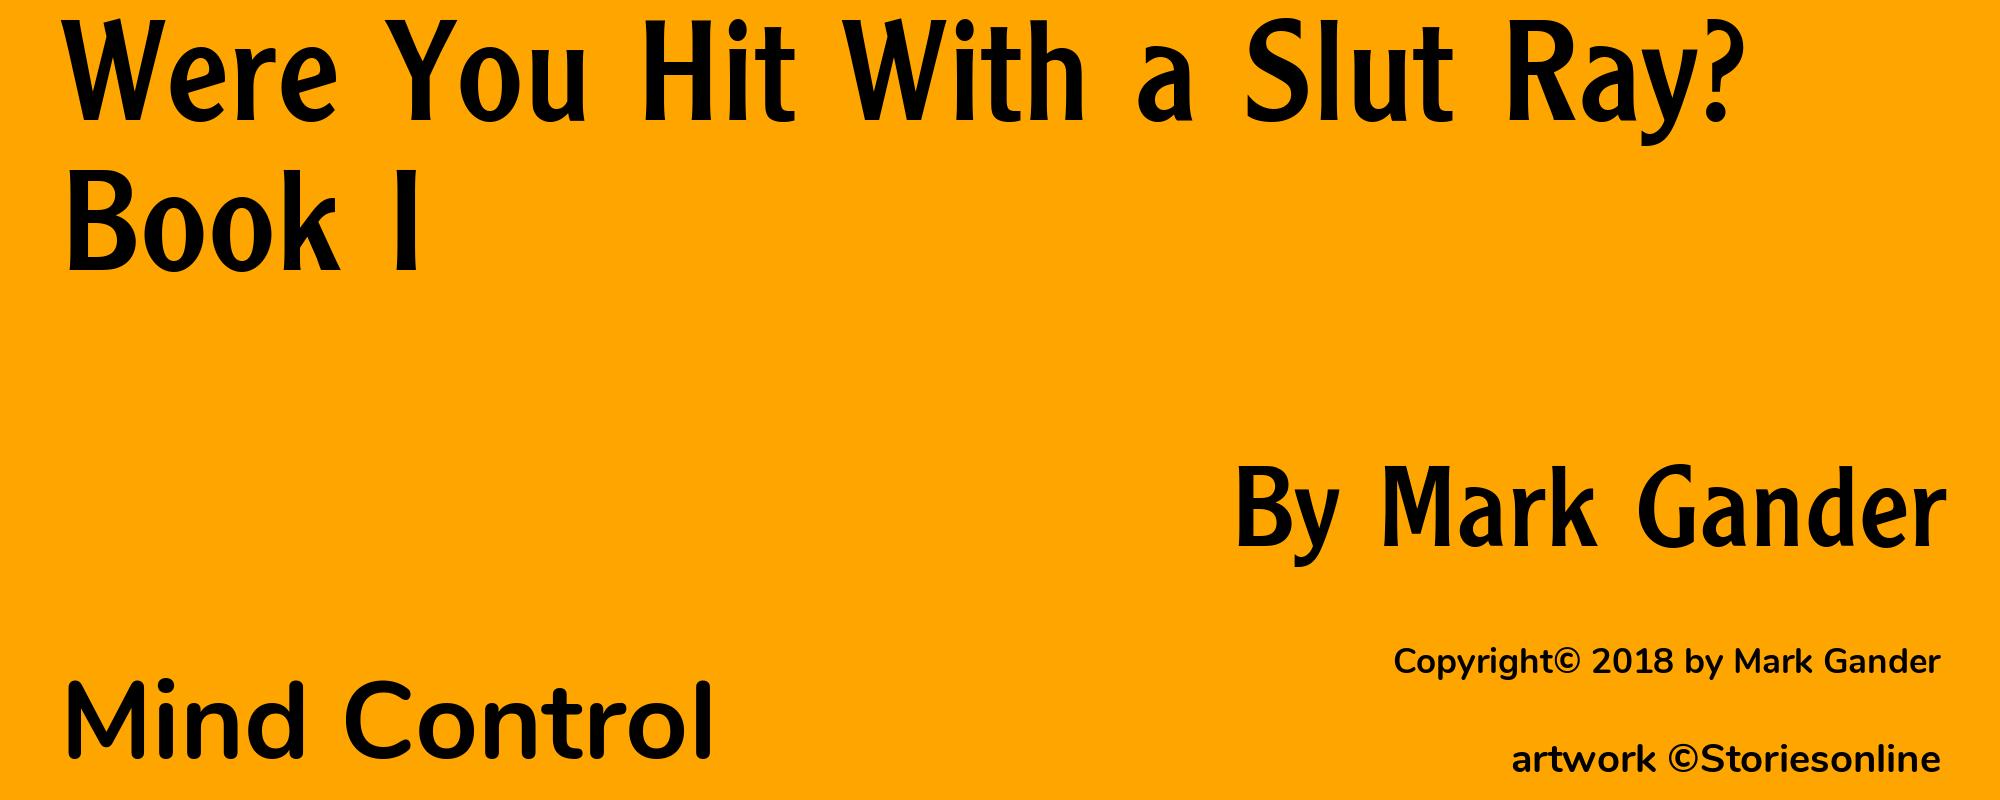 Were You Hit With a Slut Ray? Book I - Cover